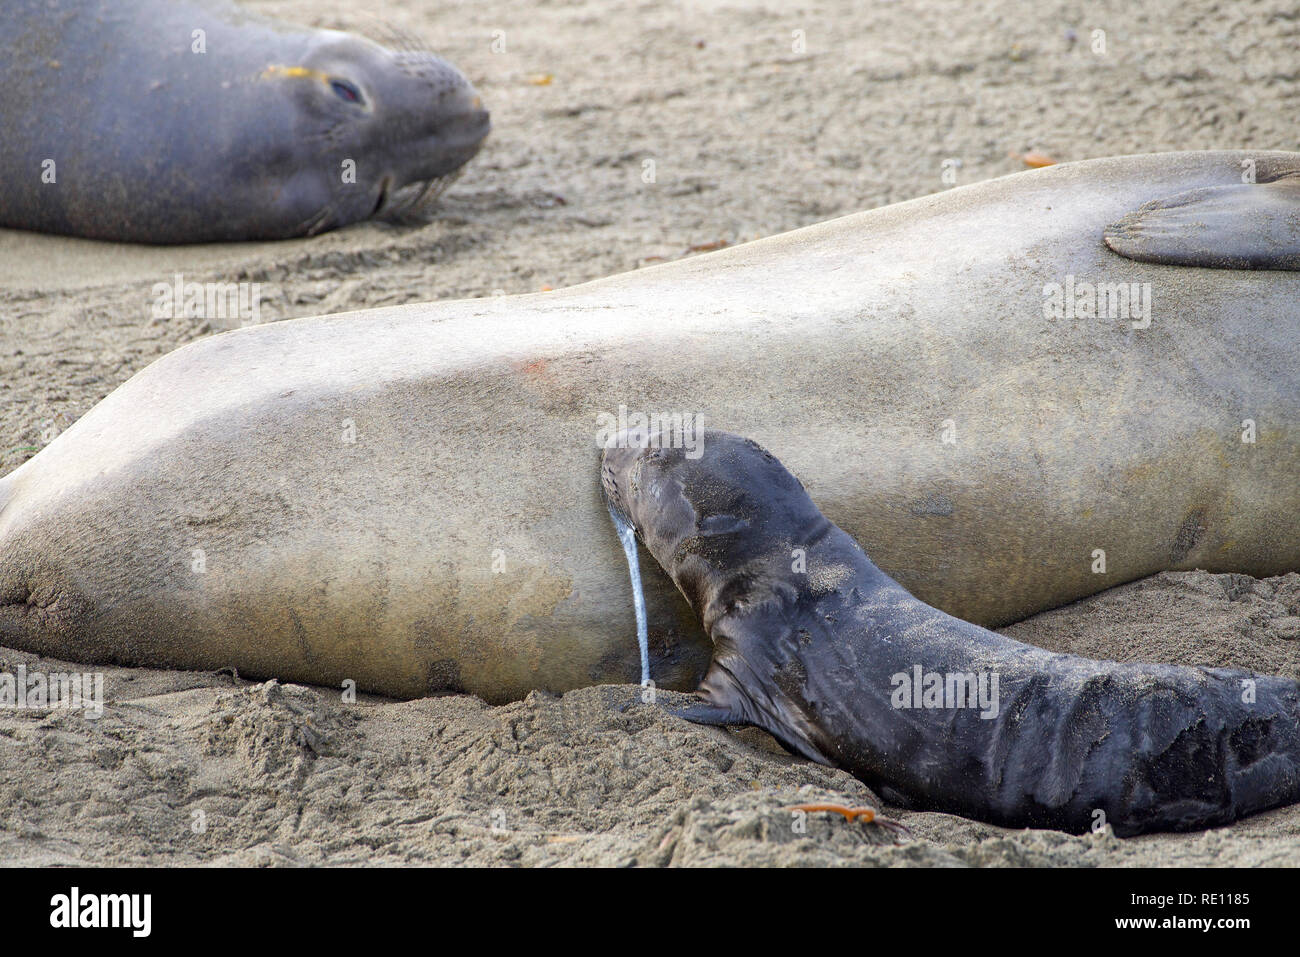 newborn elephant seal pup nursing for the first time, messy, leaking milk. The mothers will fast and nurse up to 28 days, providing their pups with ri Stock Photo